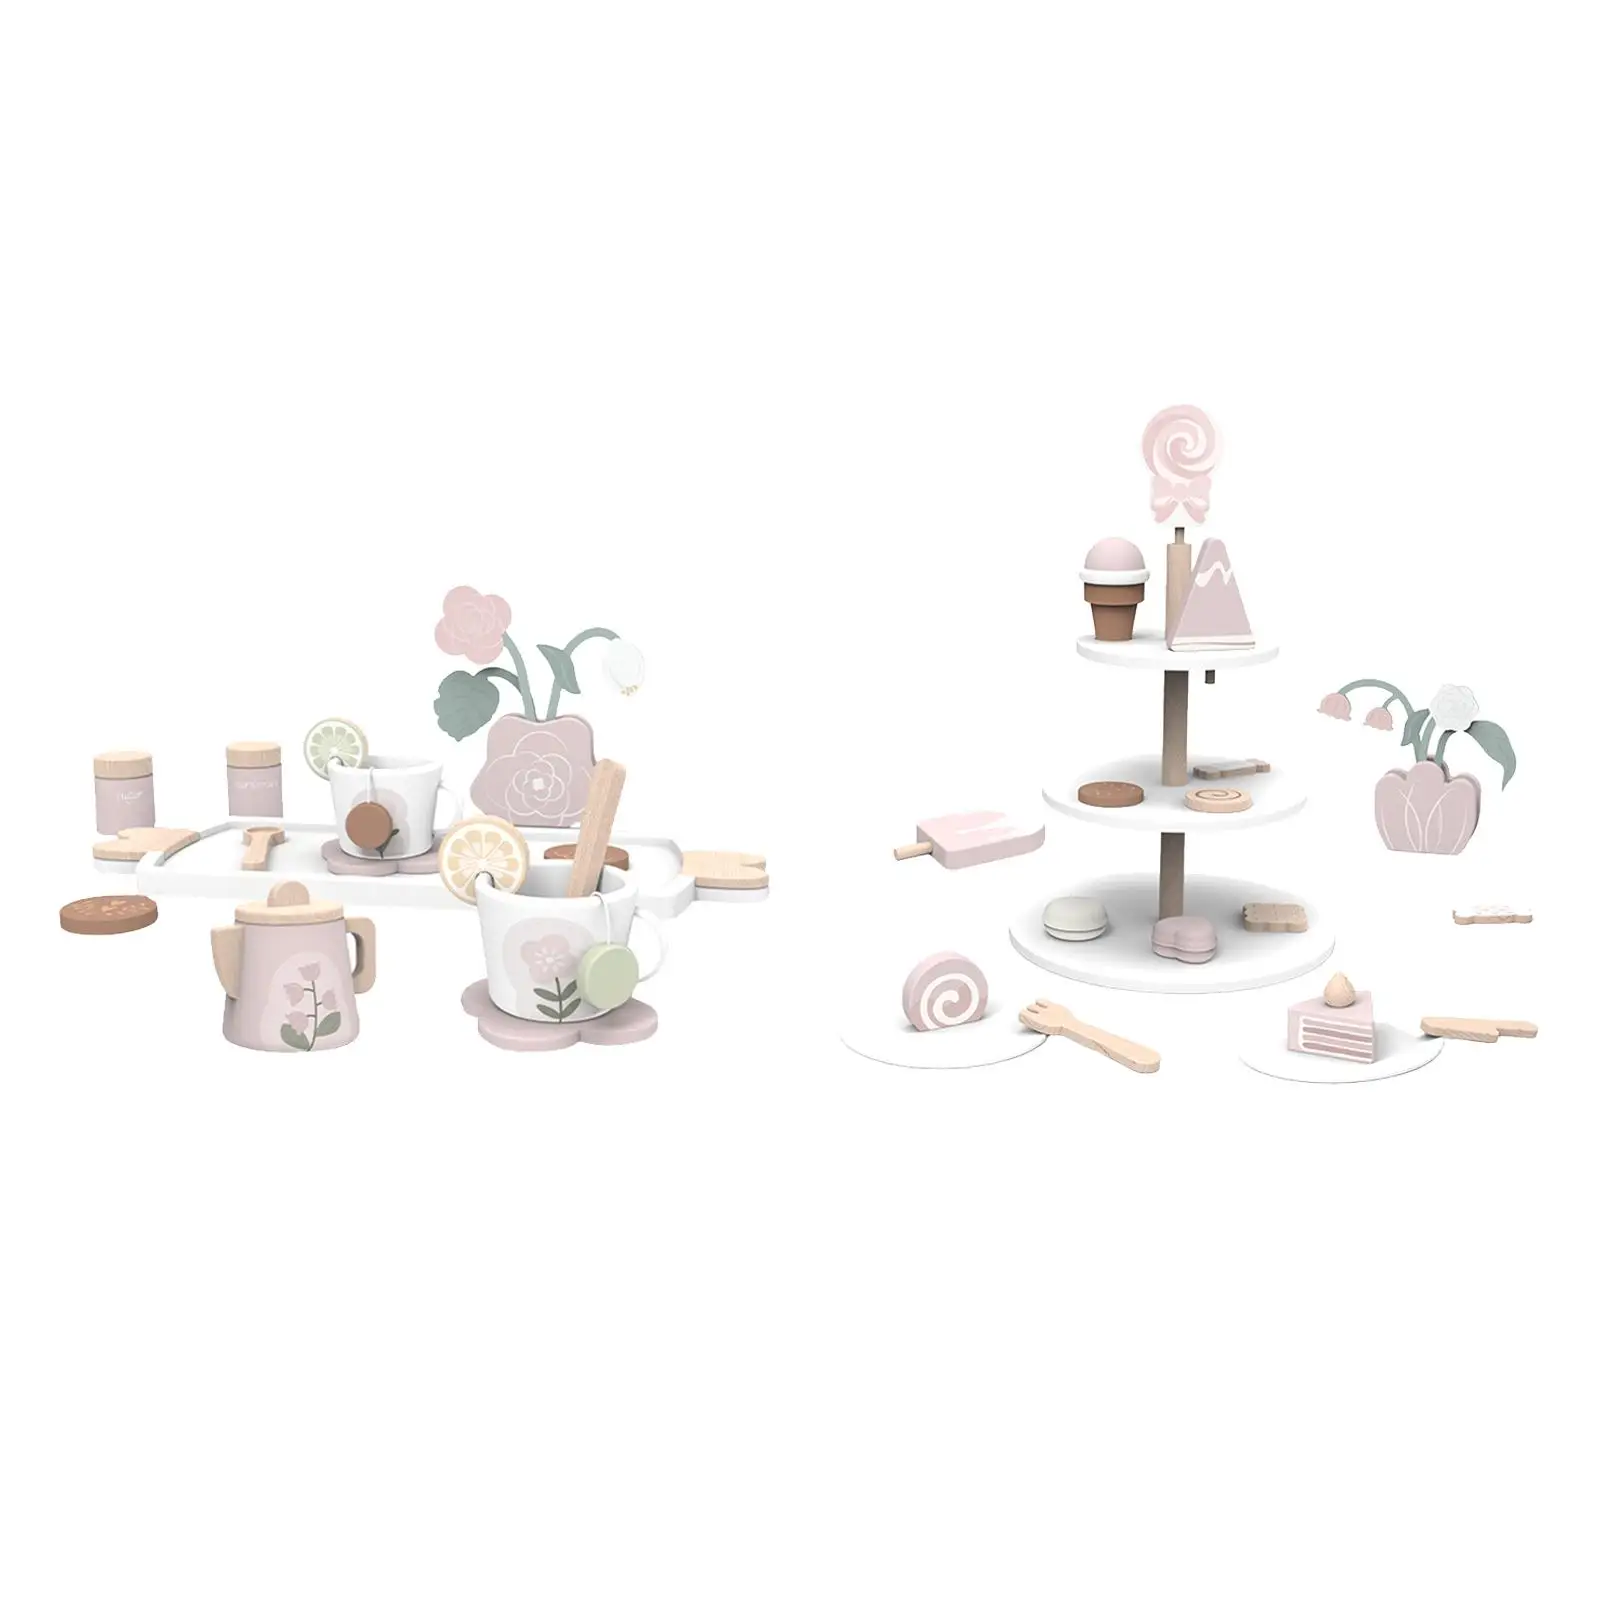 Wooden Cake Stand and Cakes Toy with Accessories Pretend Play Kitchen Playset Wooden Toys Cake for Kids Tea Party Boy Girl Kids